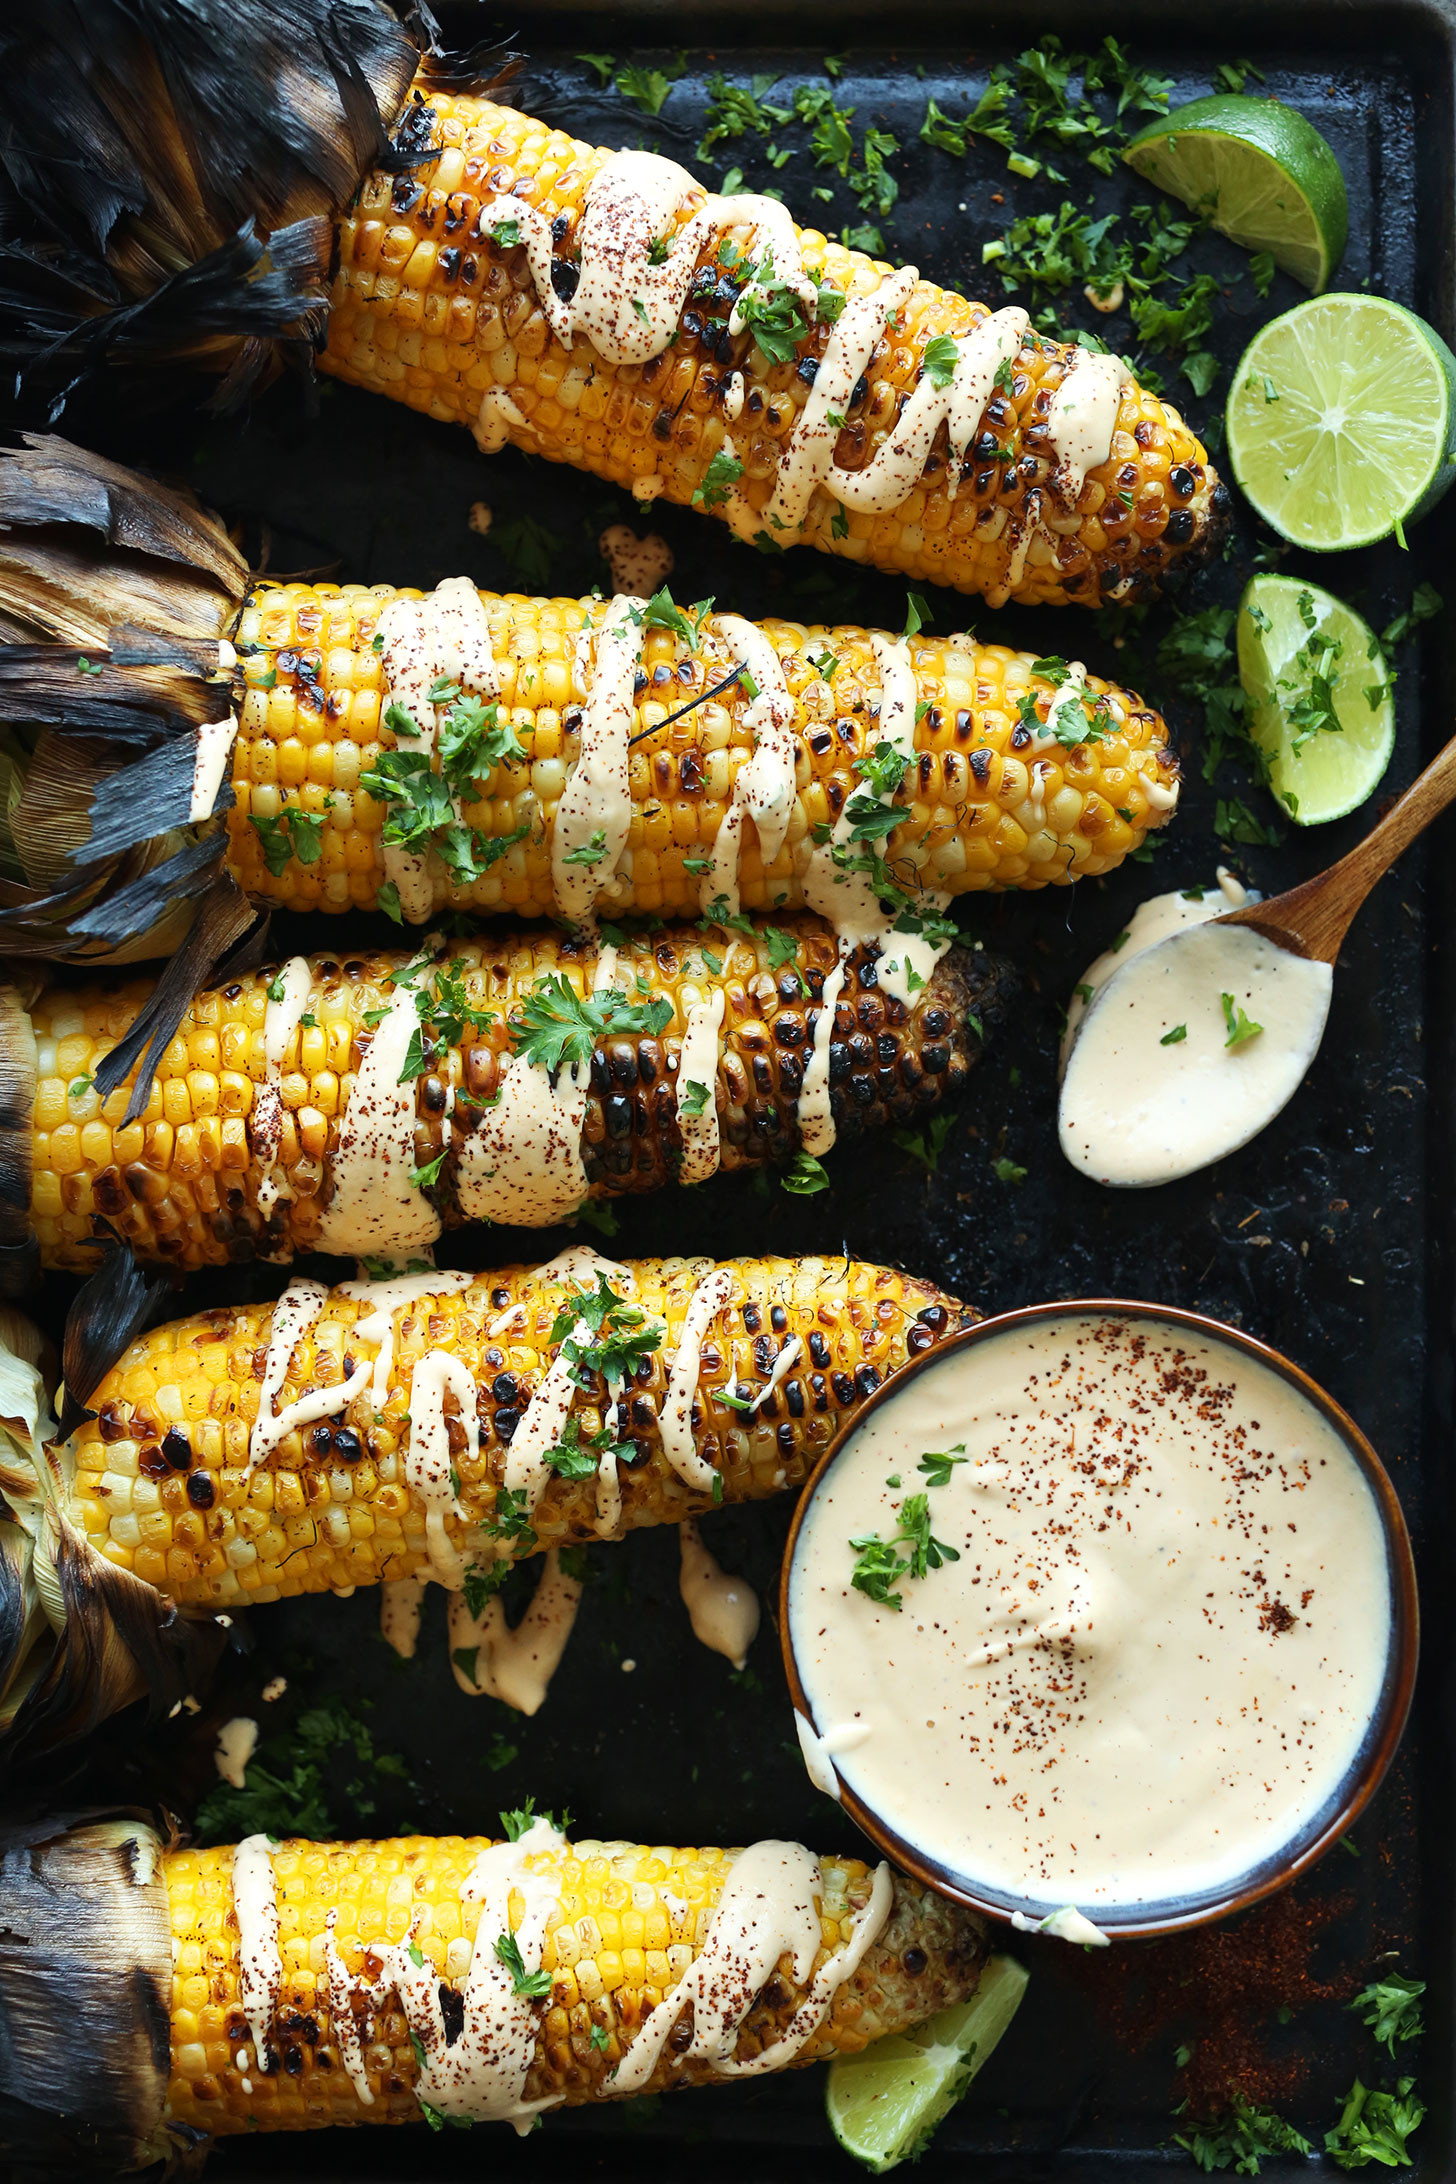 Vegetarian Recipes For The Grill
 Grilled Corn with Sriracha Aioli